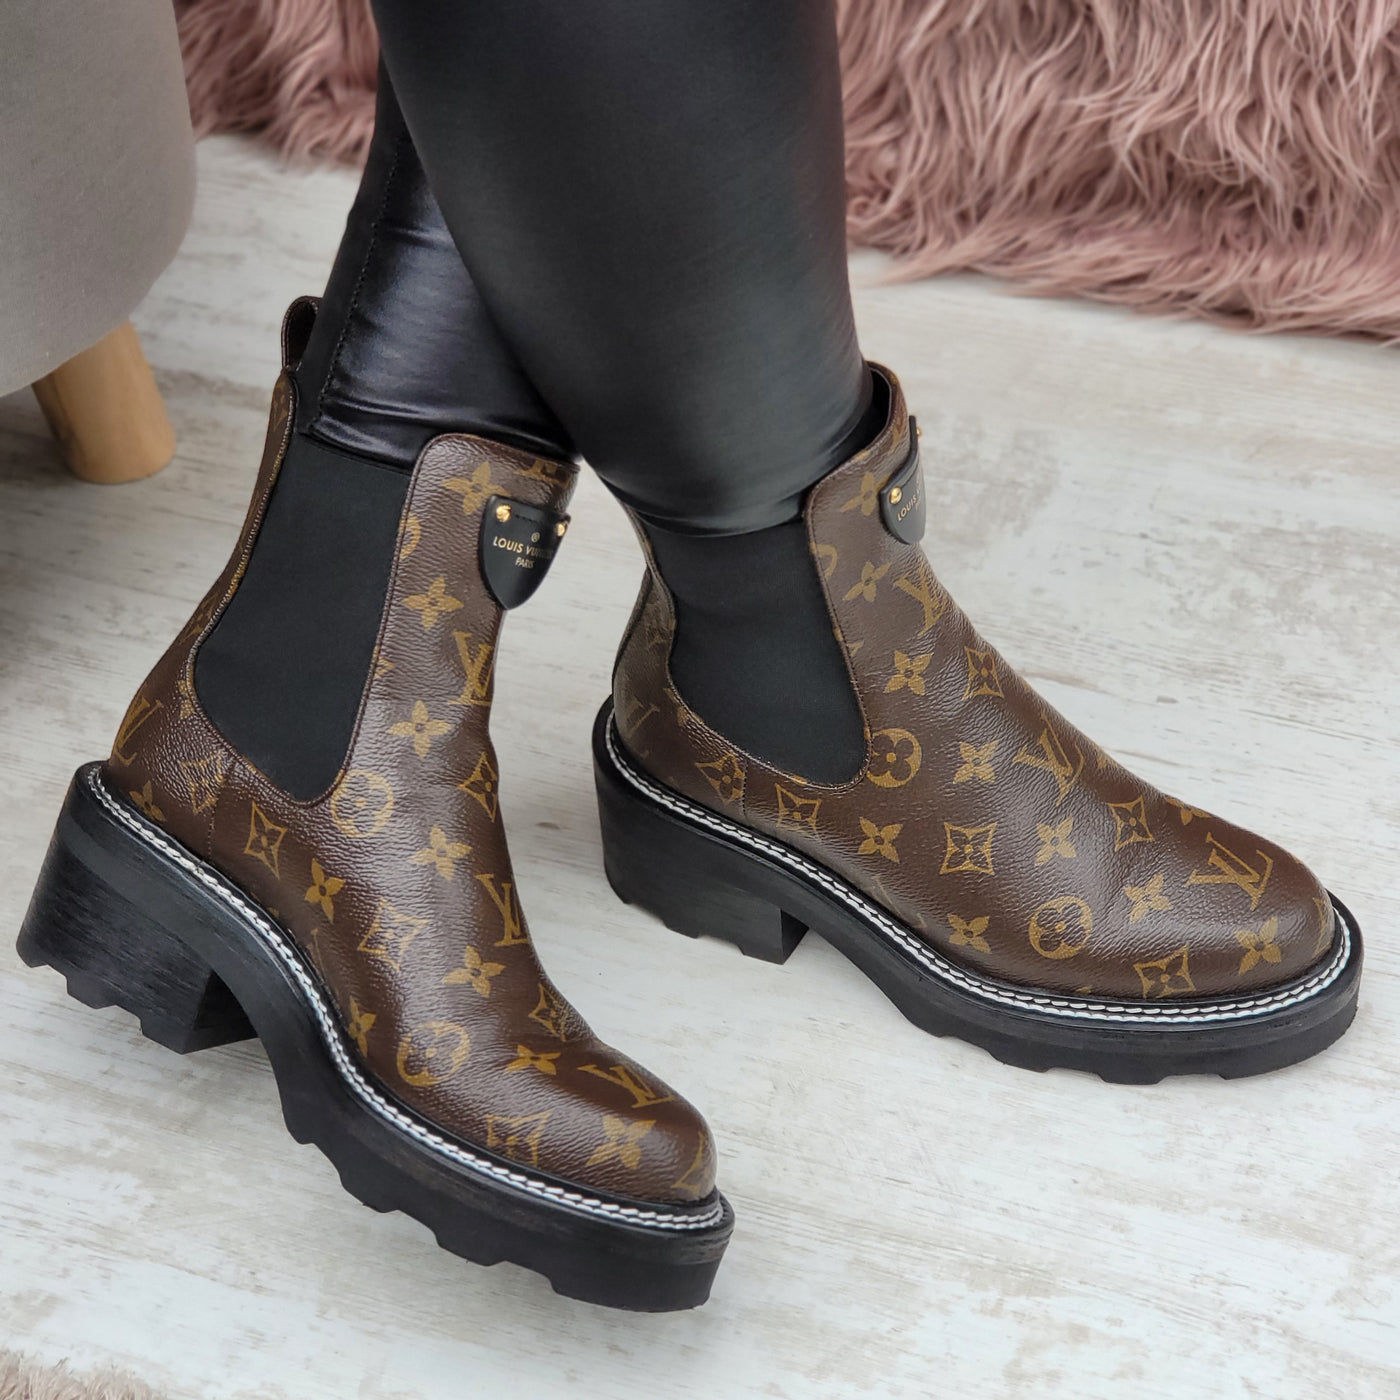 LV Beaubourg Ankle Boot - Shoes 1ACH3E